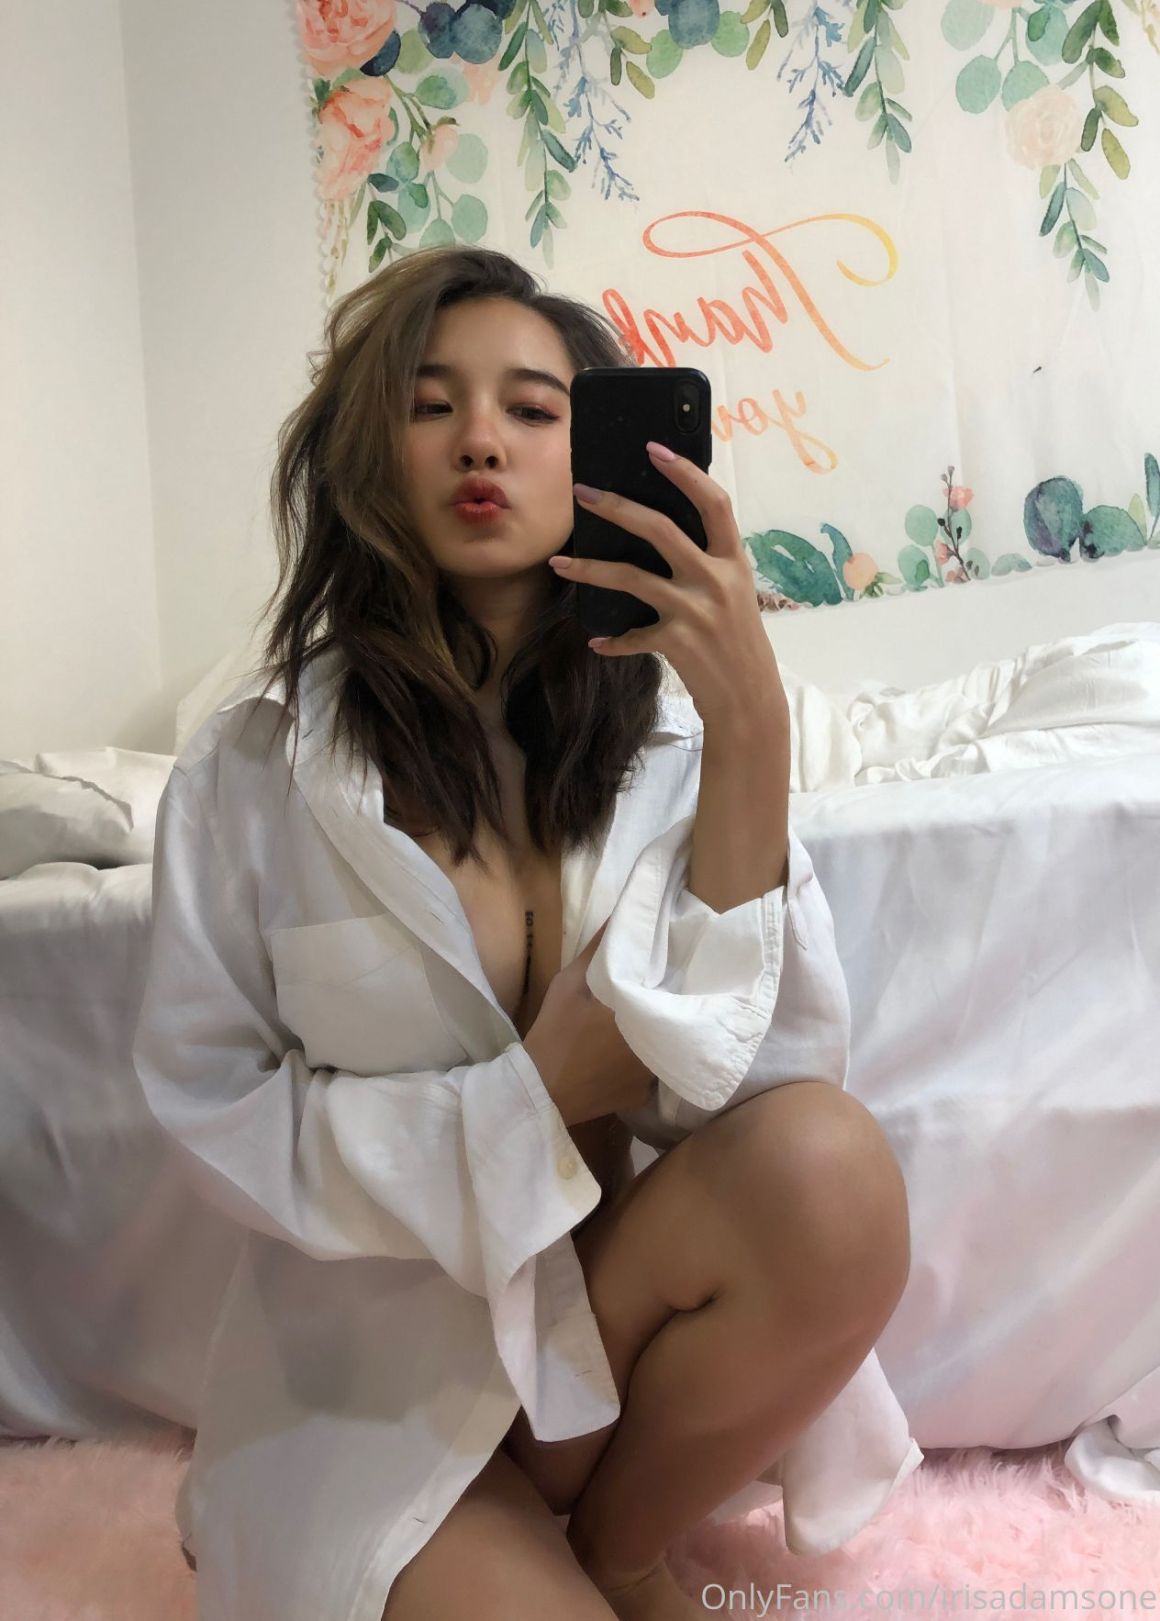 AsianOnlyfans 032 197 20210822